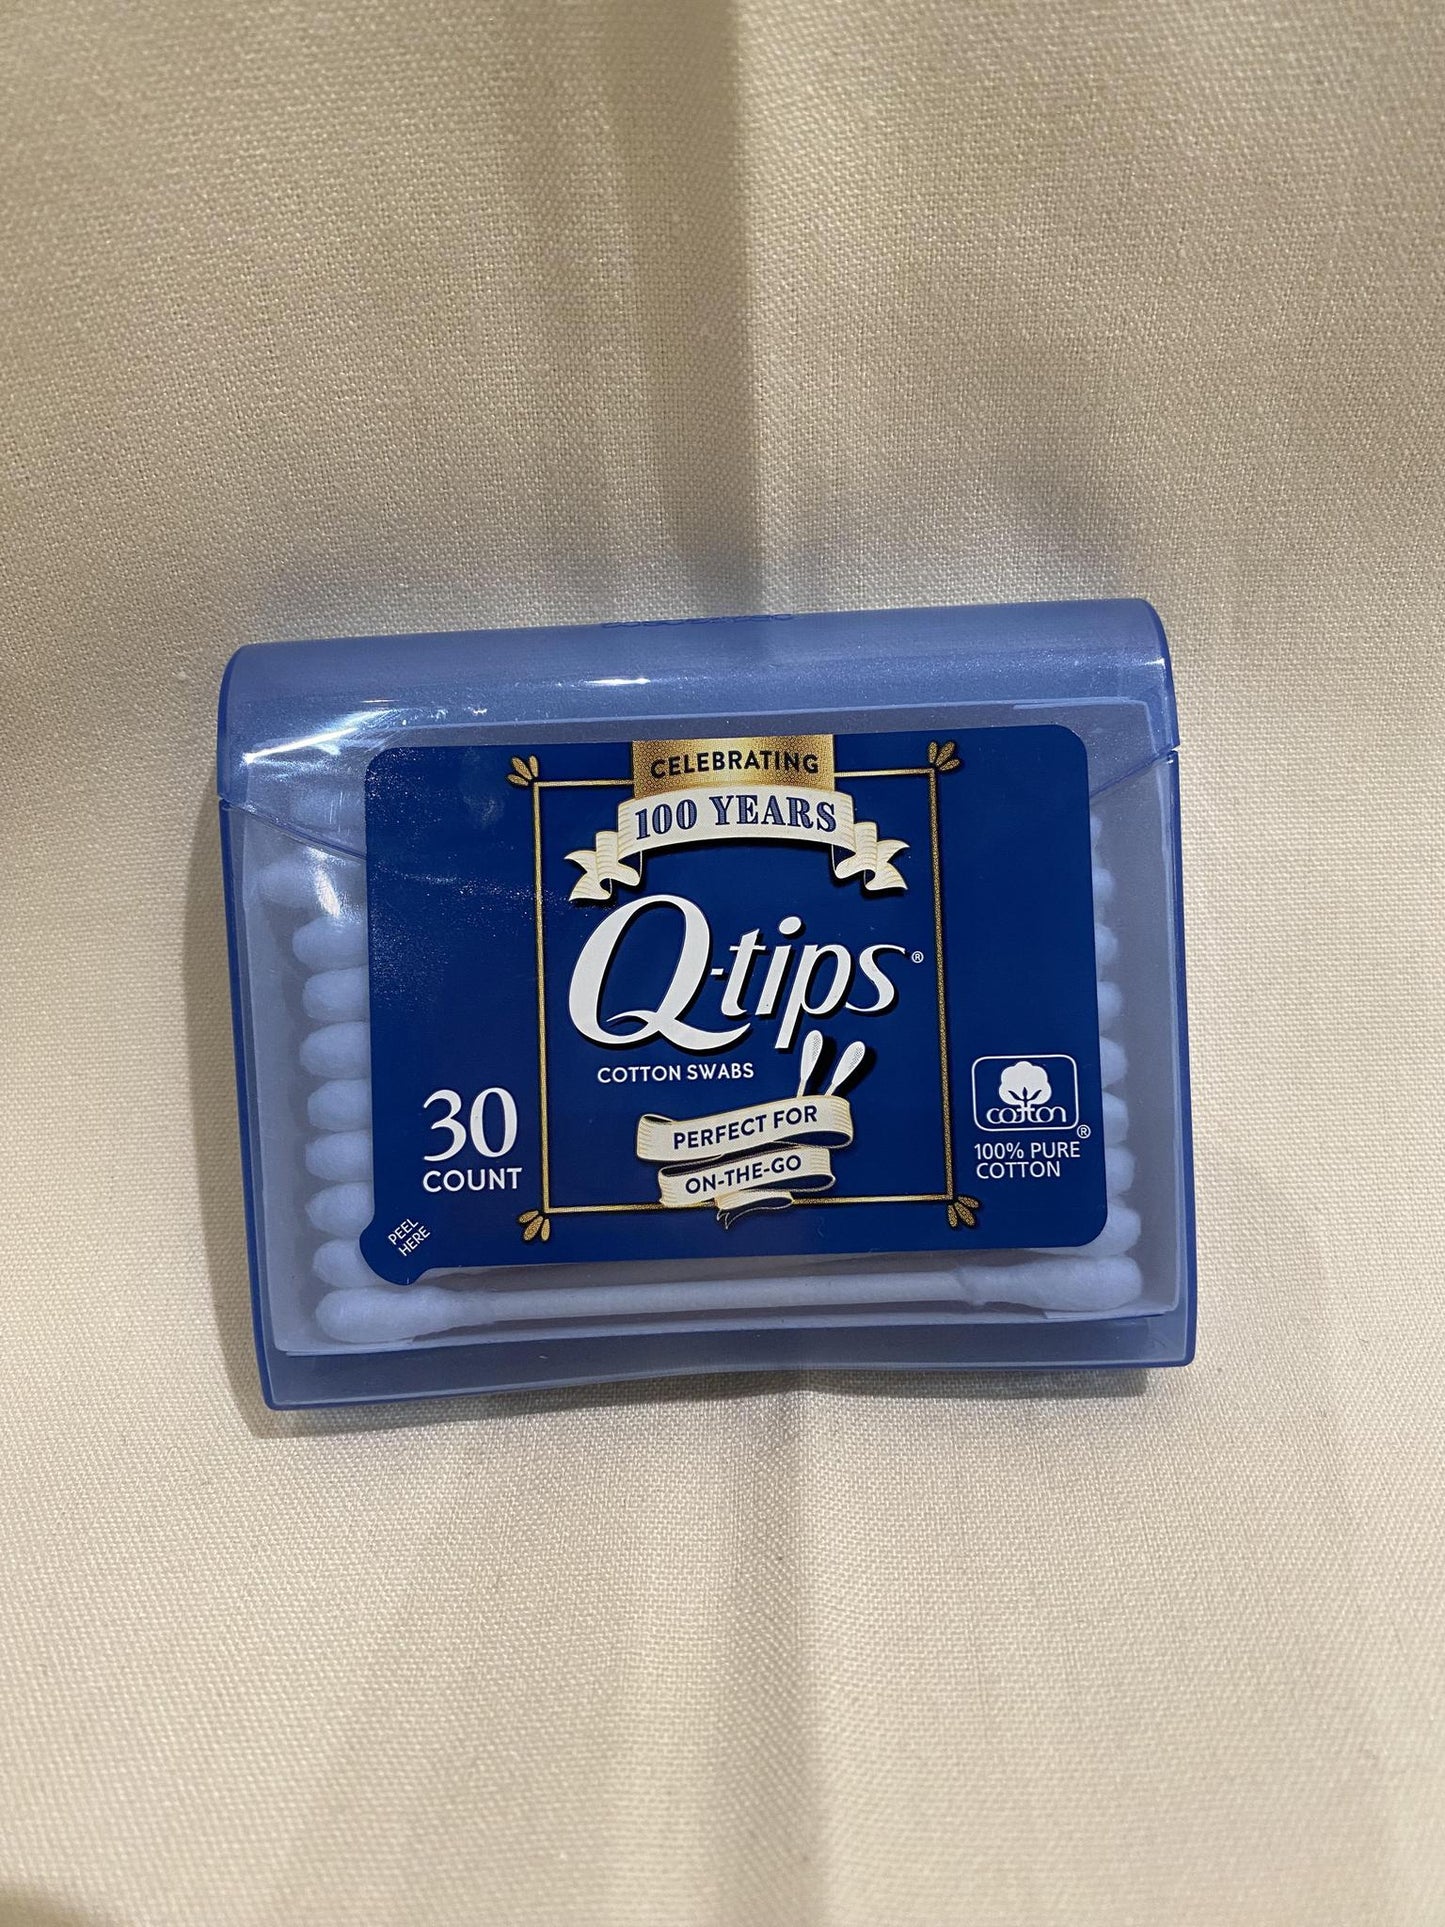 Q-Tips 30 Count Sundries